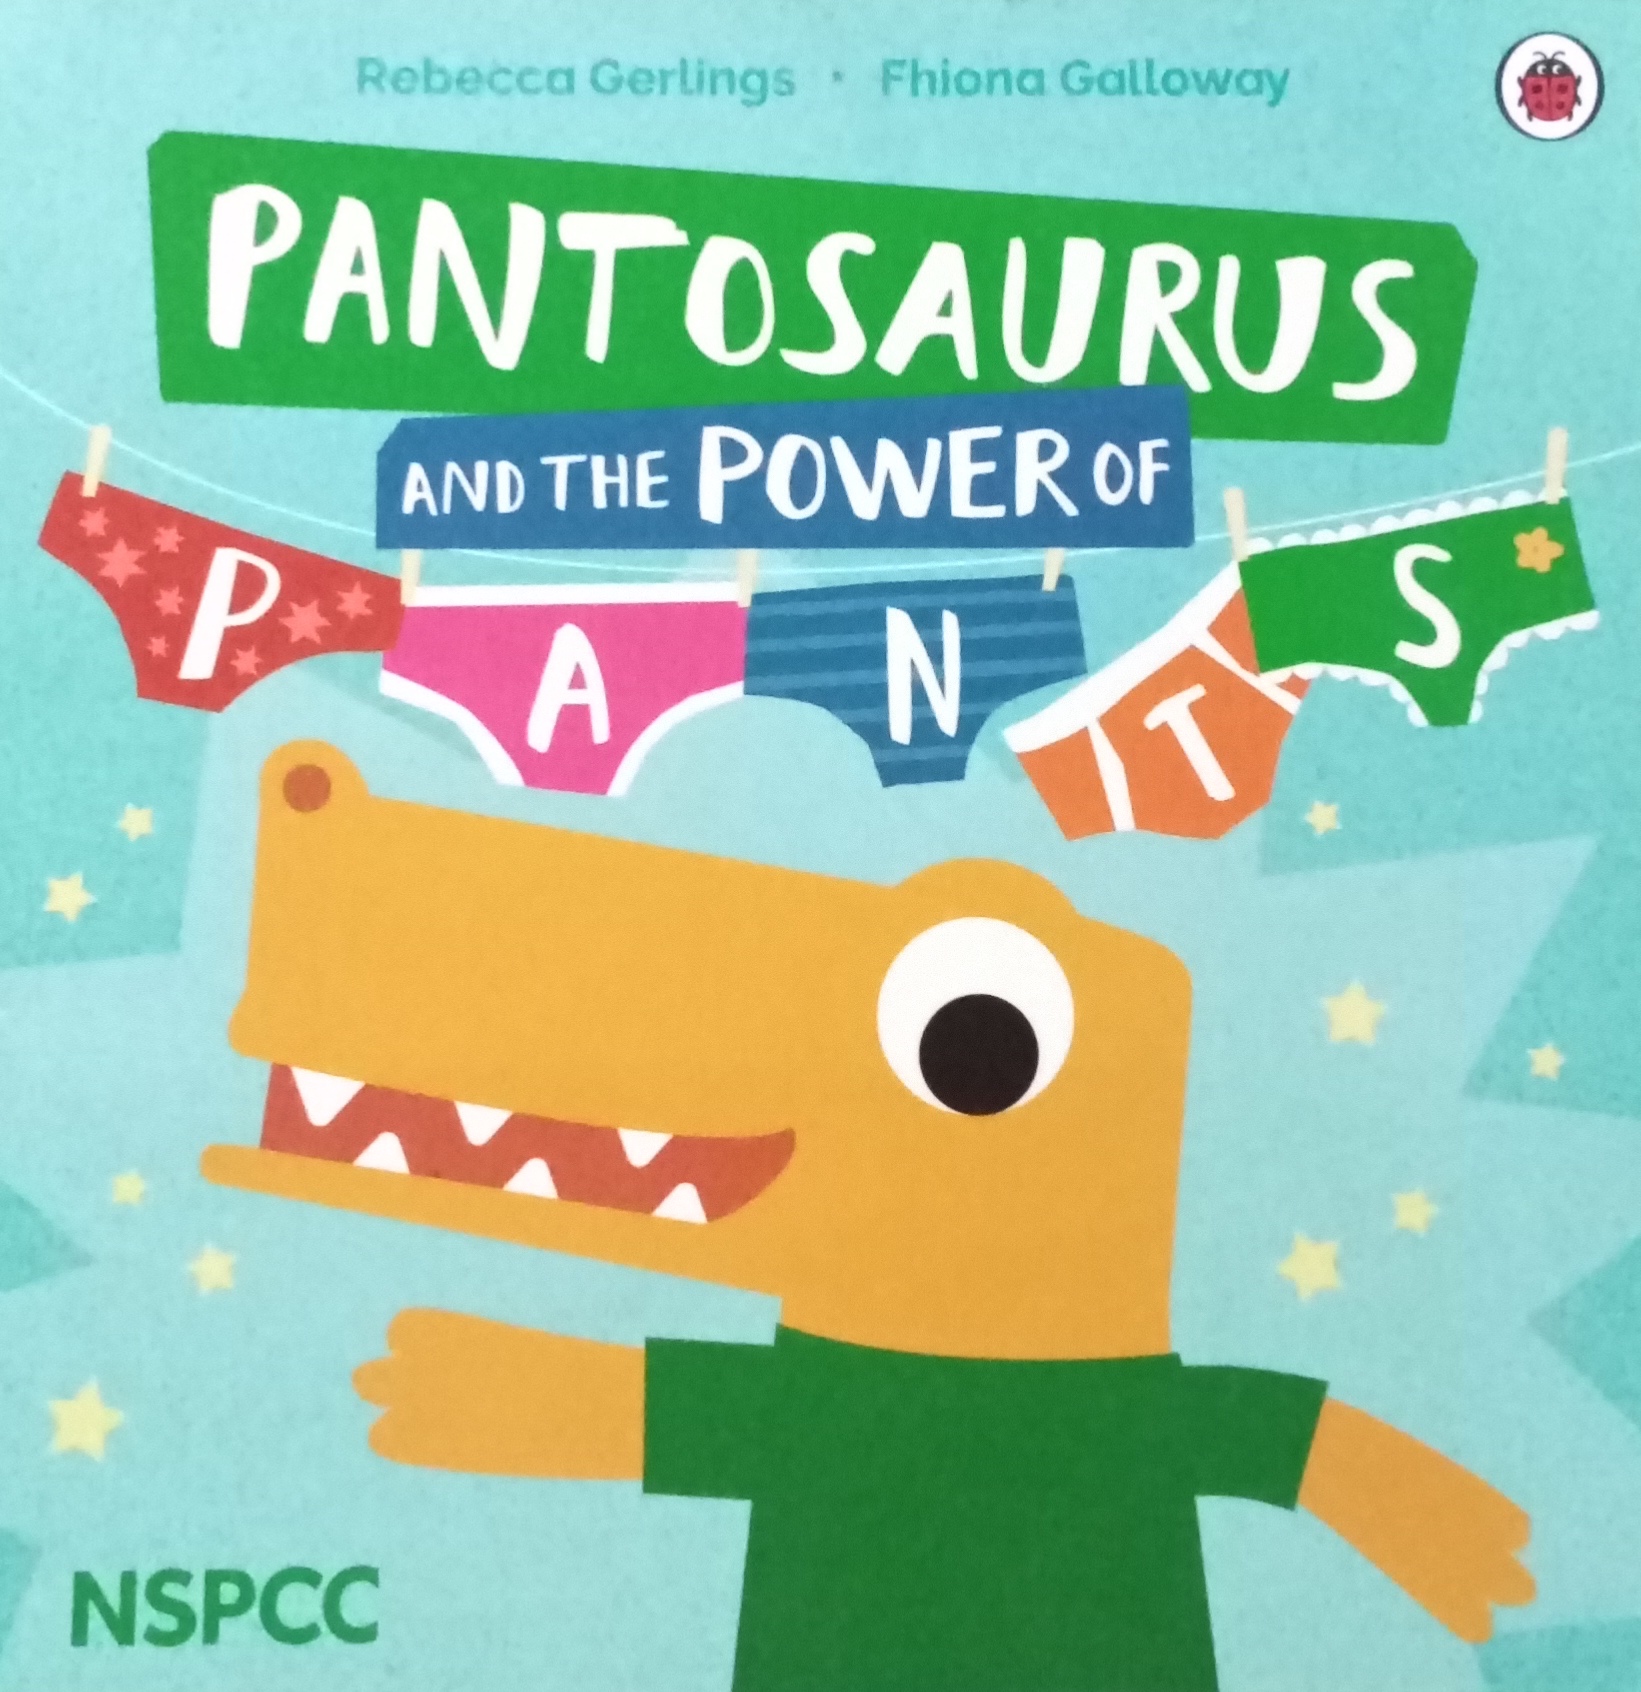 NSPCC's Pantosaurus and the Power of Pants Audio Book in English and Welsh  | Edutainment Licensing